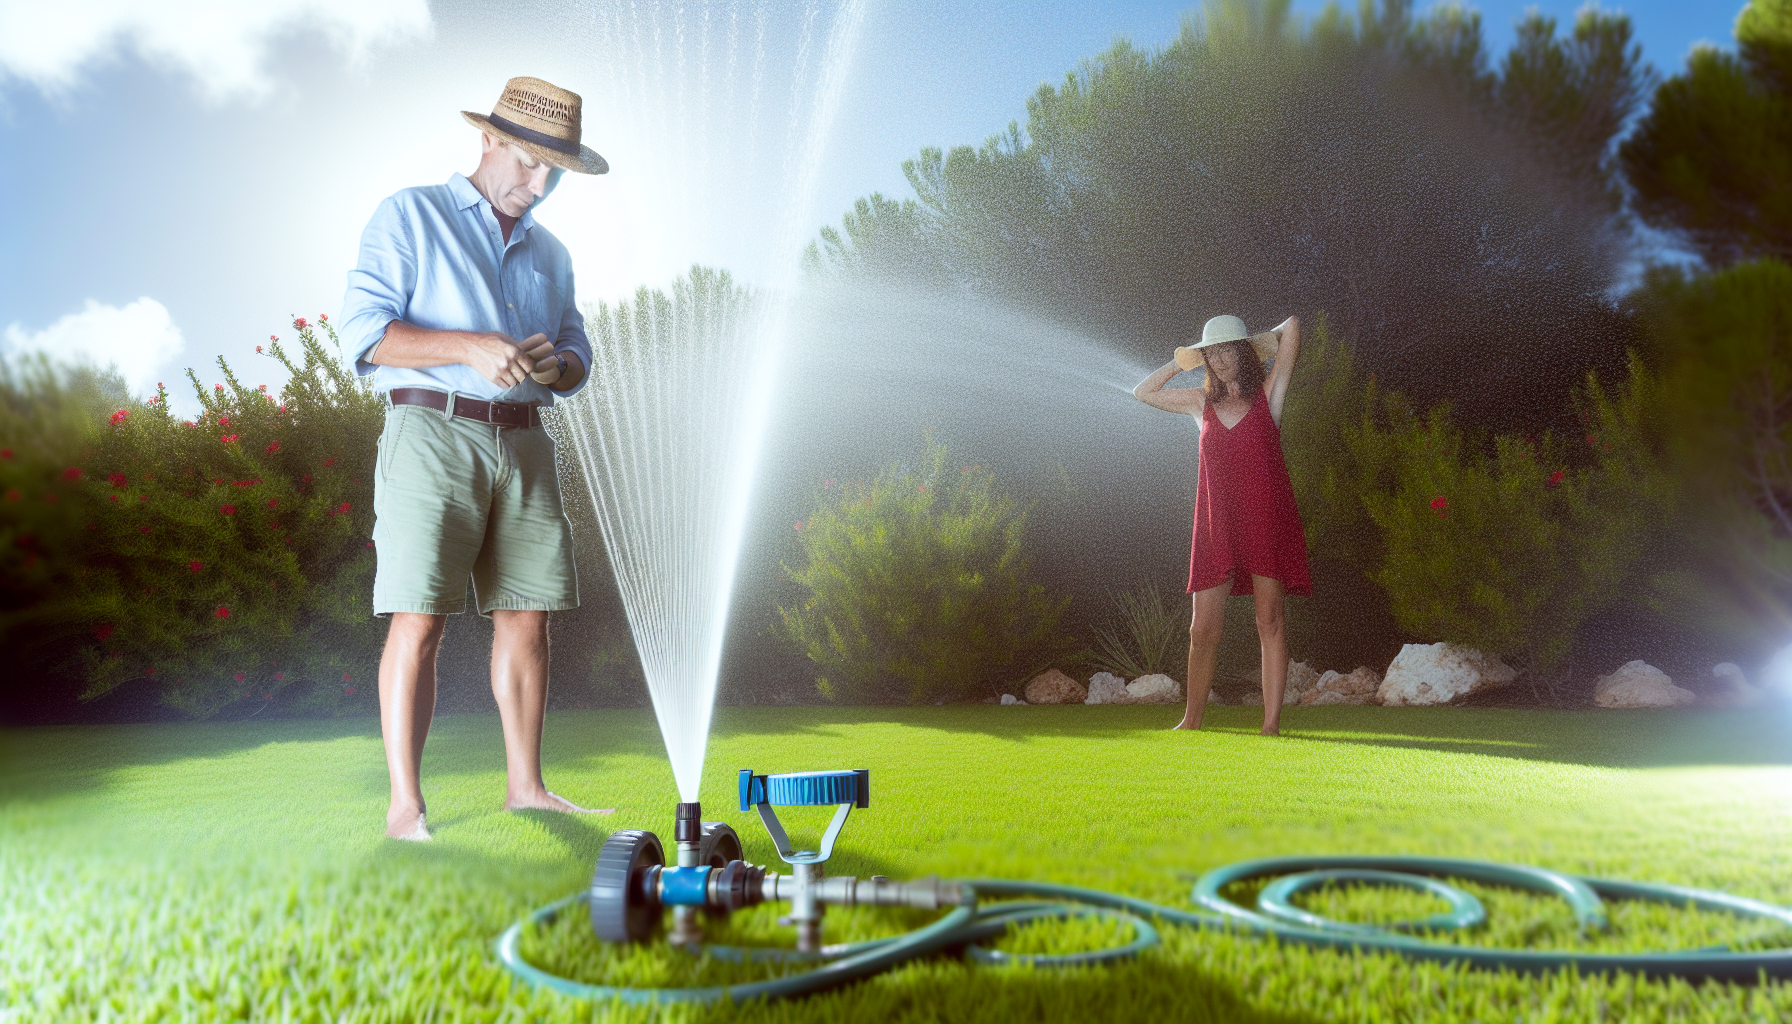 Watering a lawn during dry weather